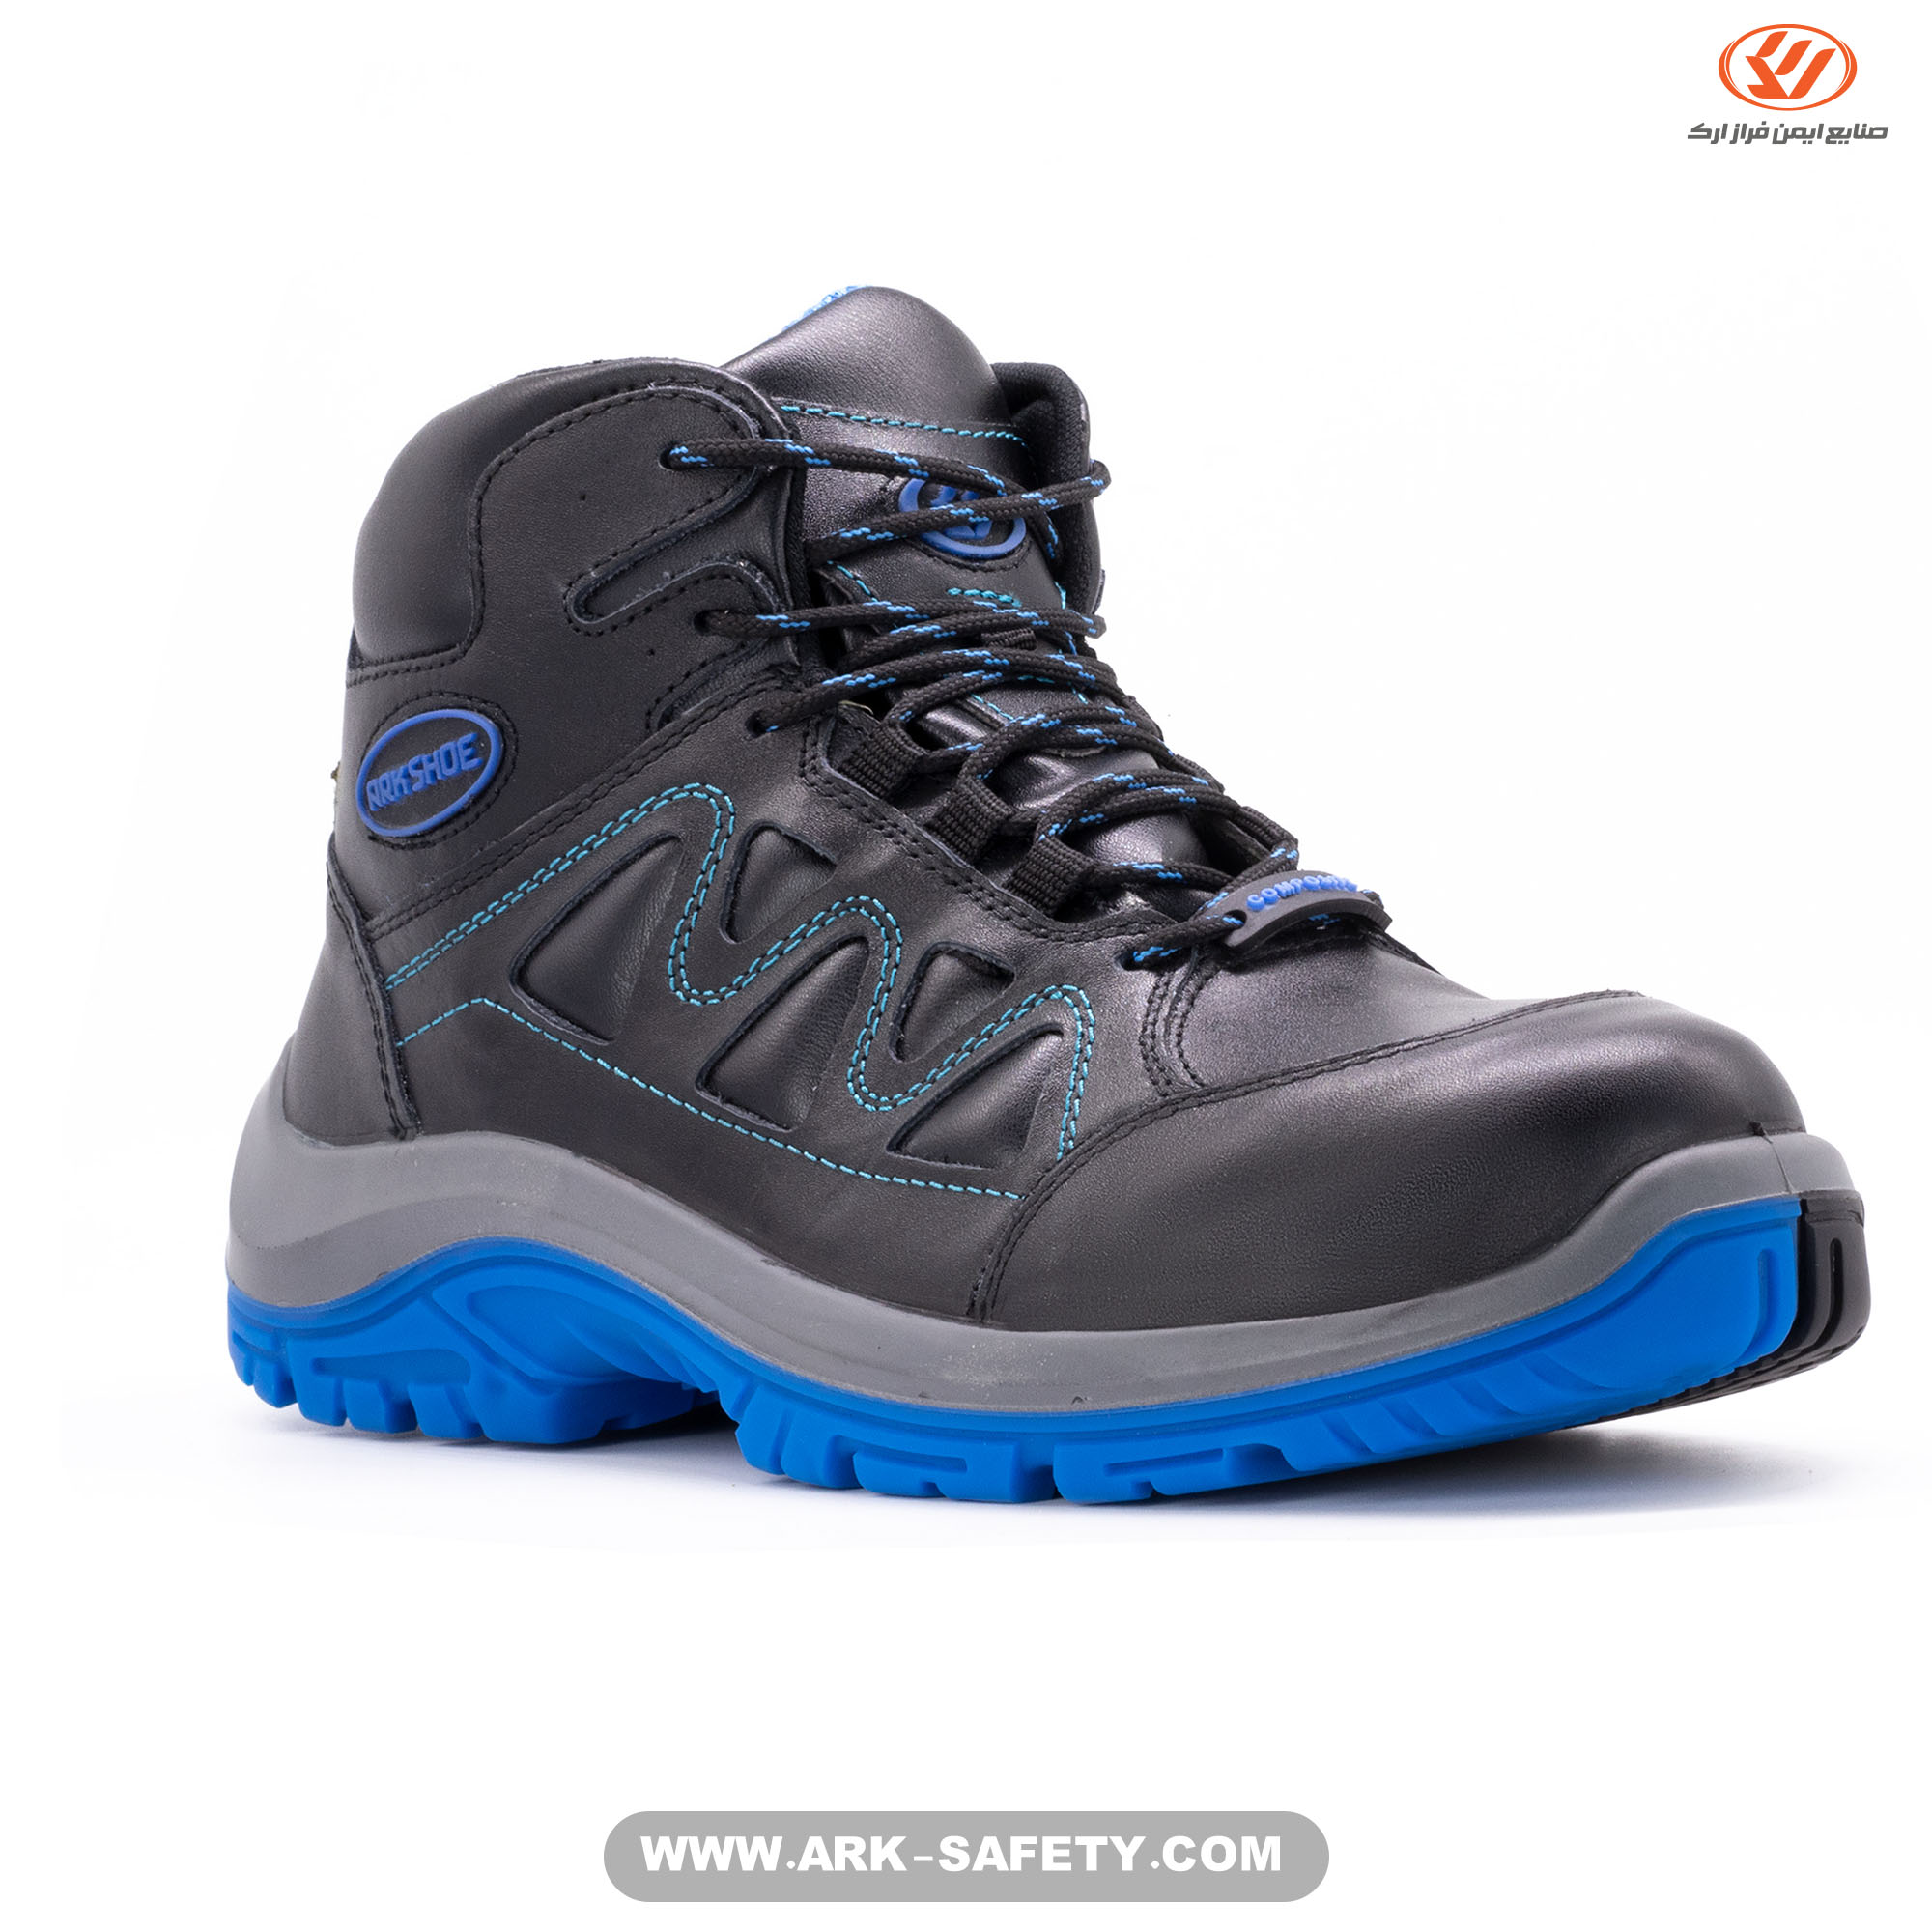 Types of electrical insulation safety shoes